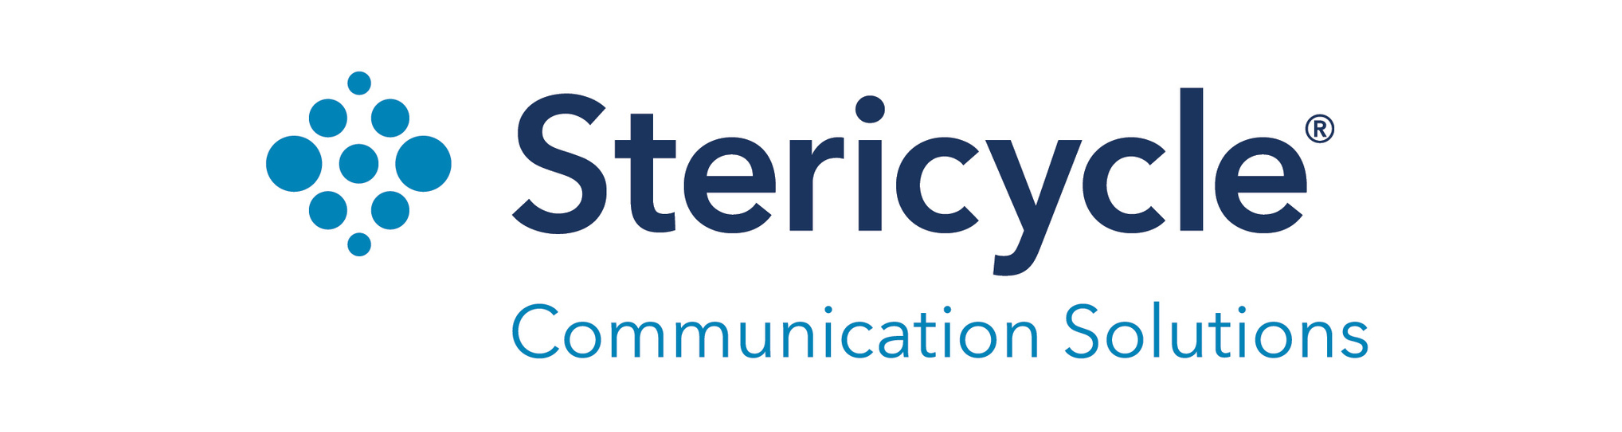 Stericycle Communications Solutions Logo